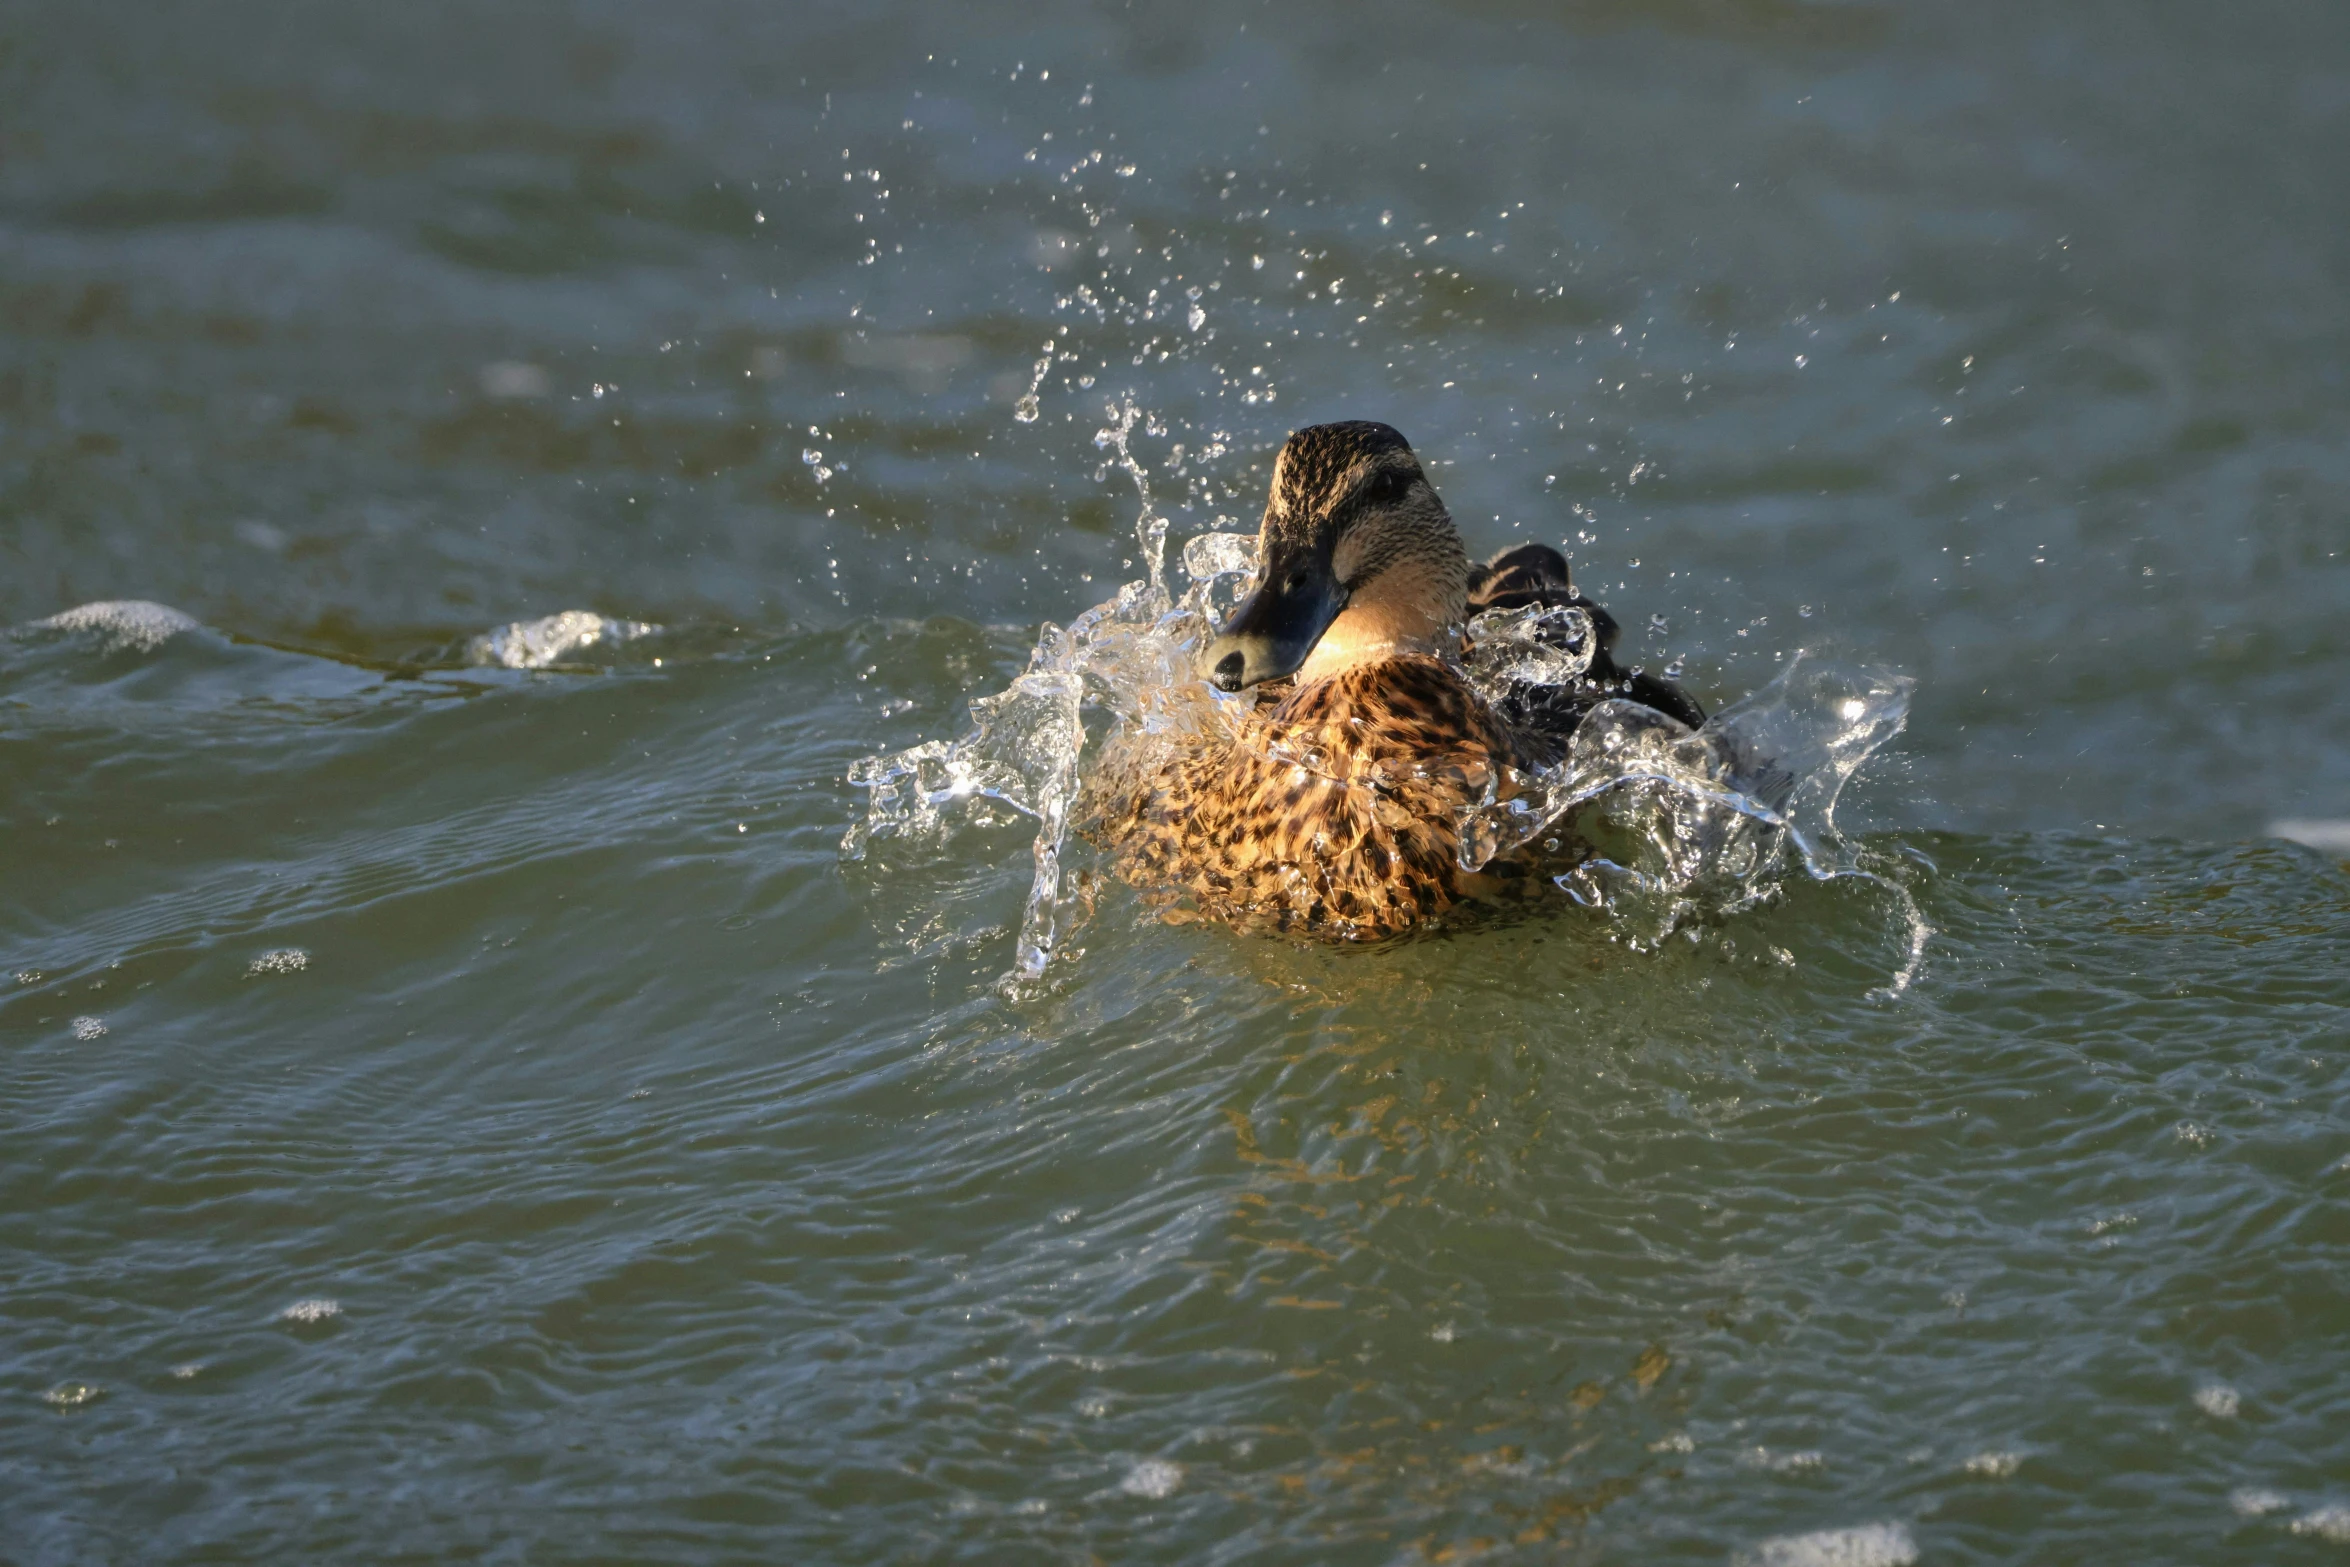 two ducks, one male, are swimming in water